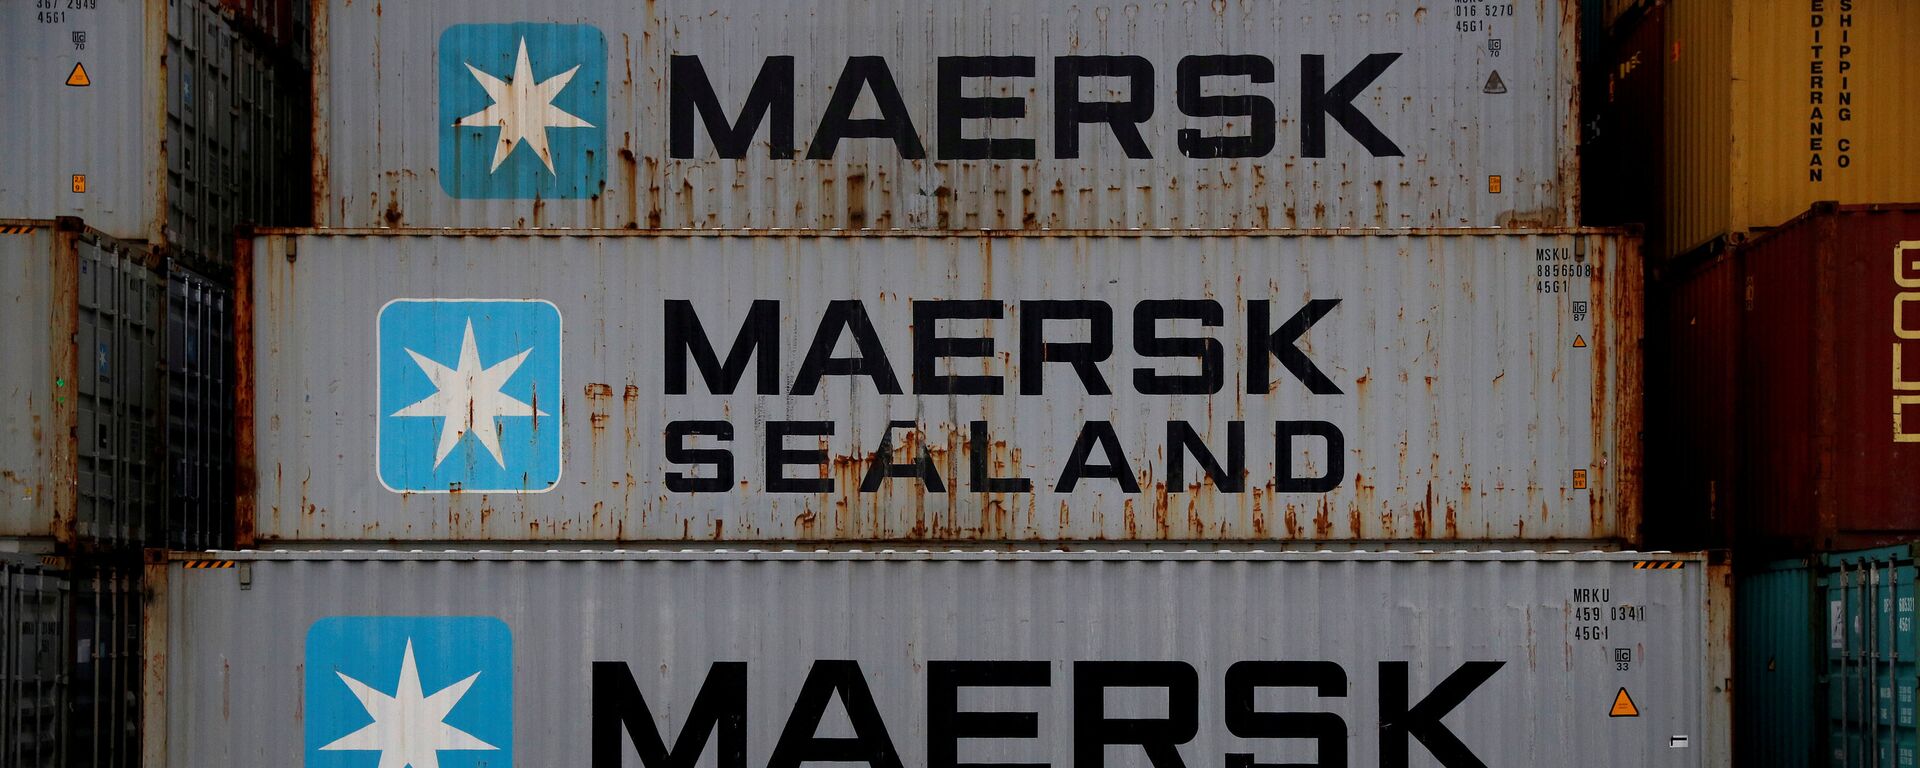 FILE PHOTO: Empty Maersk shipping containers are seen stacked at Peel Ports container terminal in Liverpool, Britain, December 9, 2016. - Sputnik International, 1920, 05.11.2021